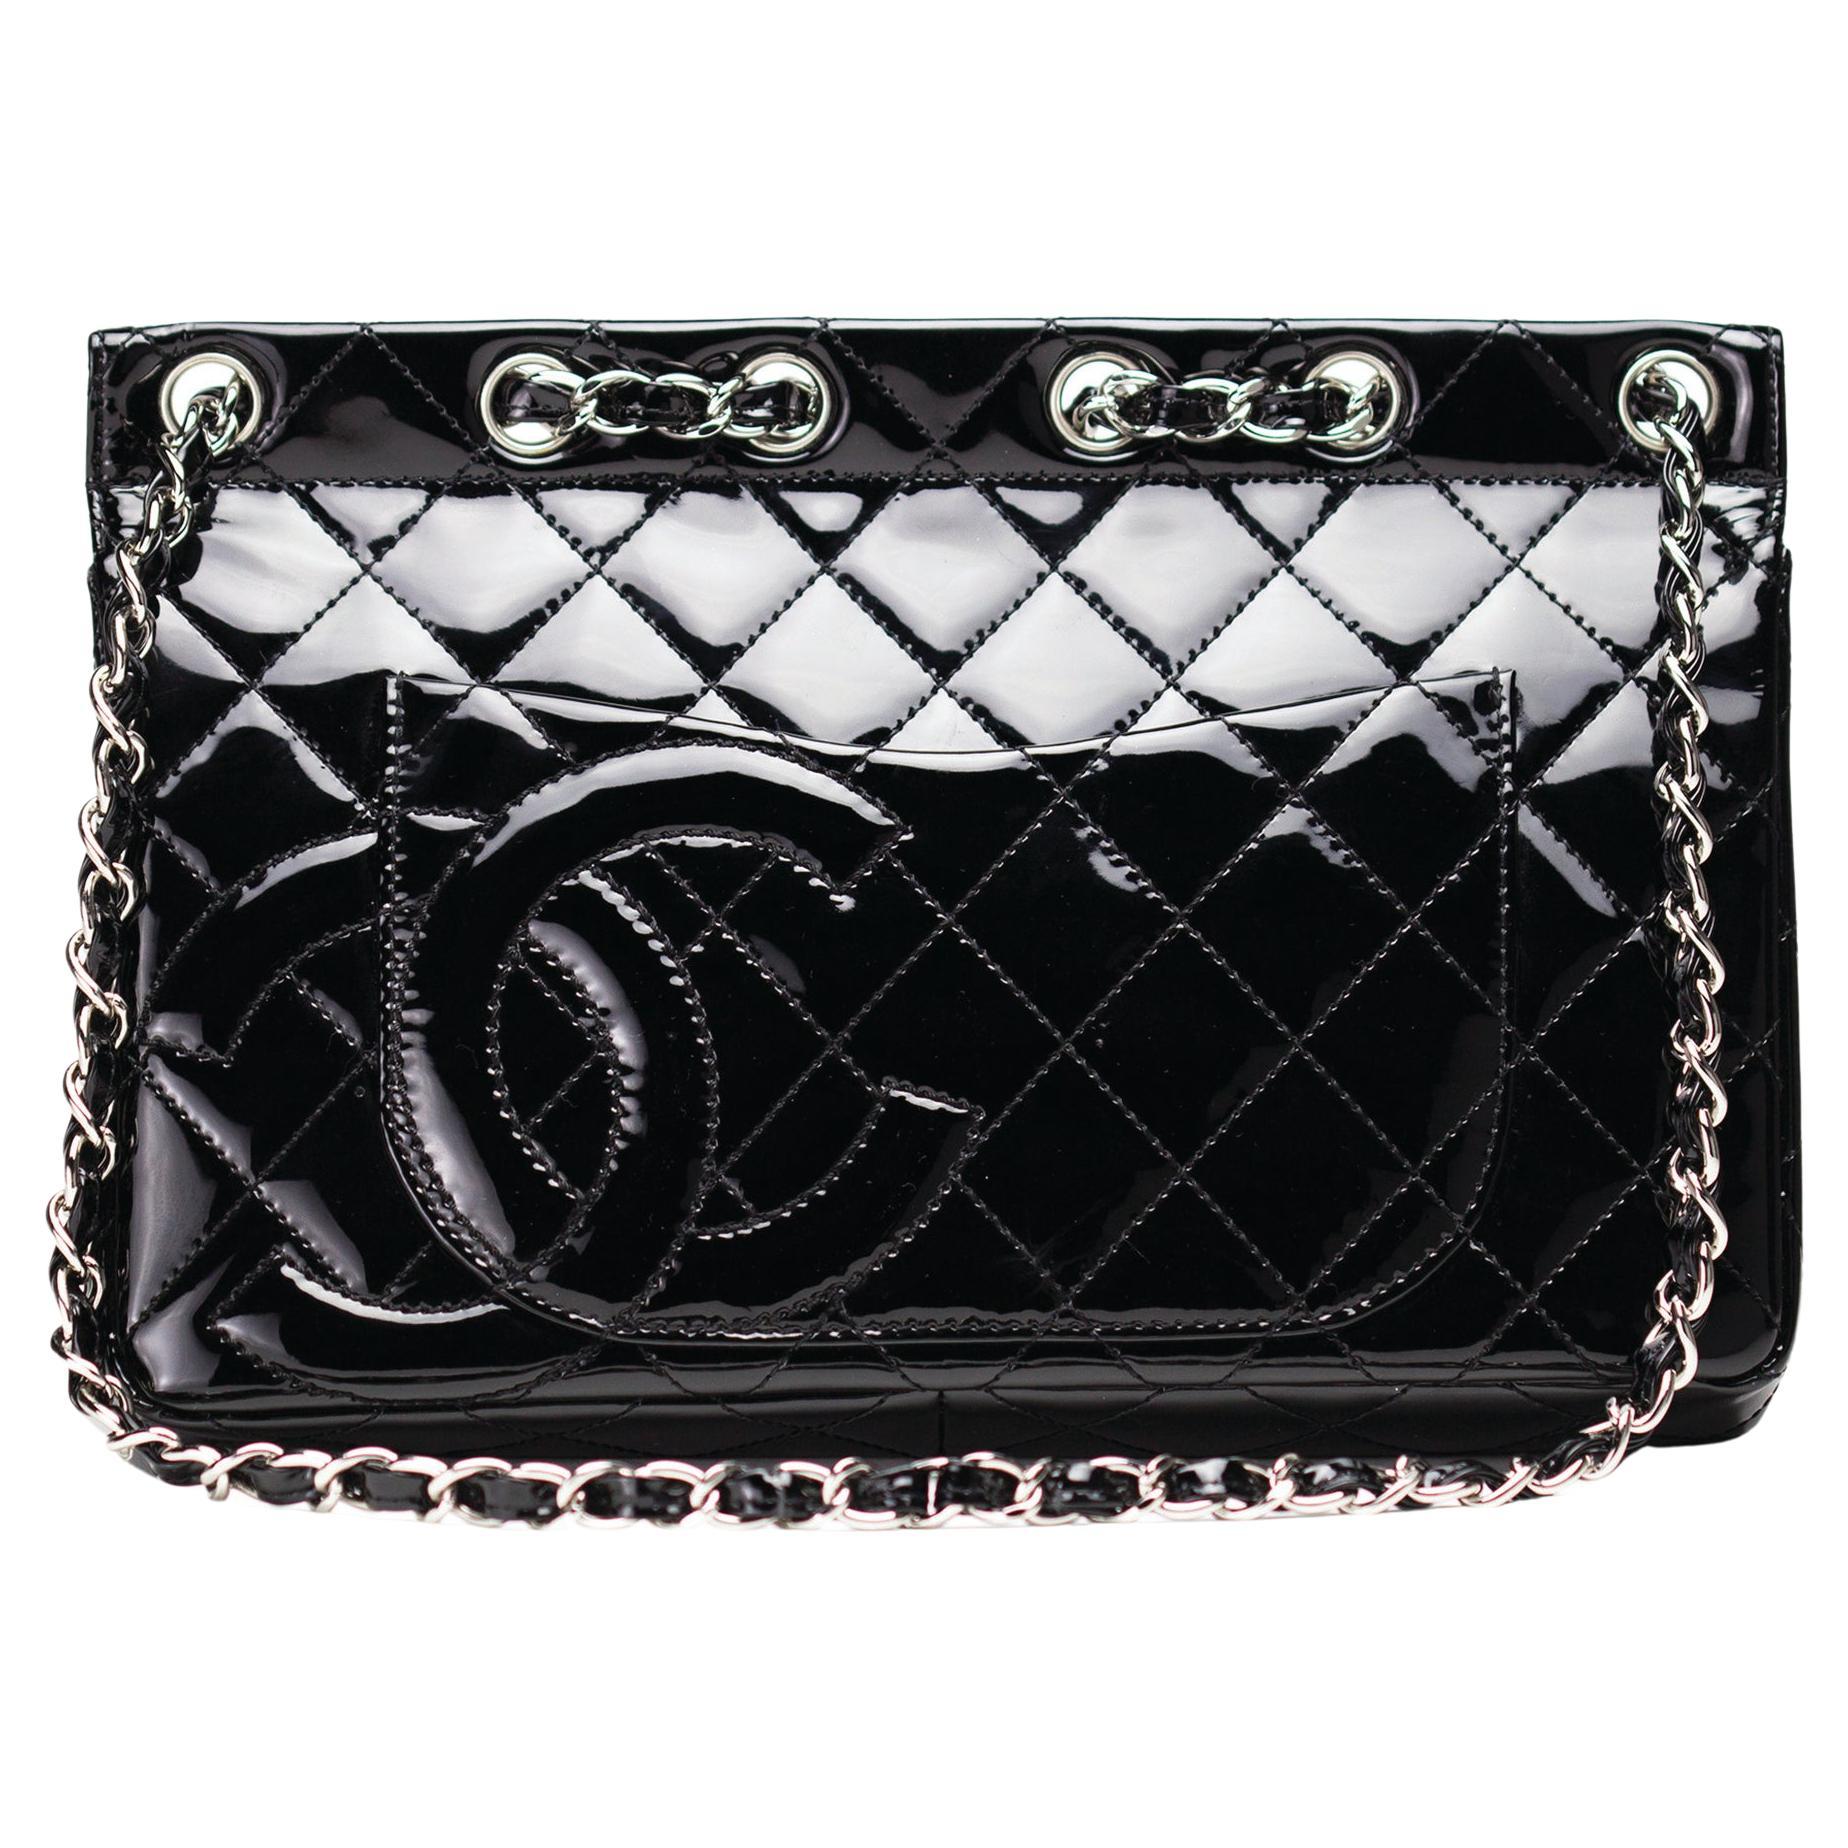 Women's or Men's Chanel Classic Flap Supermodel Super Rare Quilted Black Patent Leather Bag For Sale